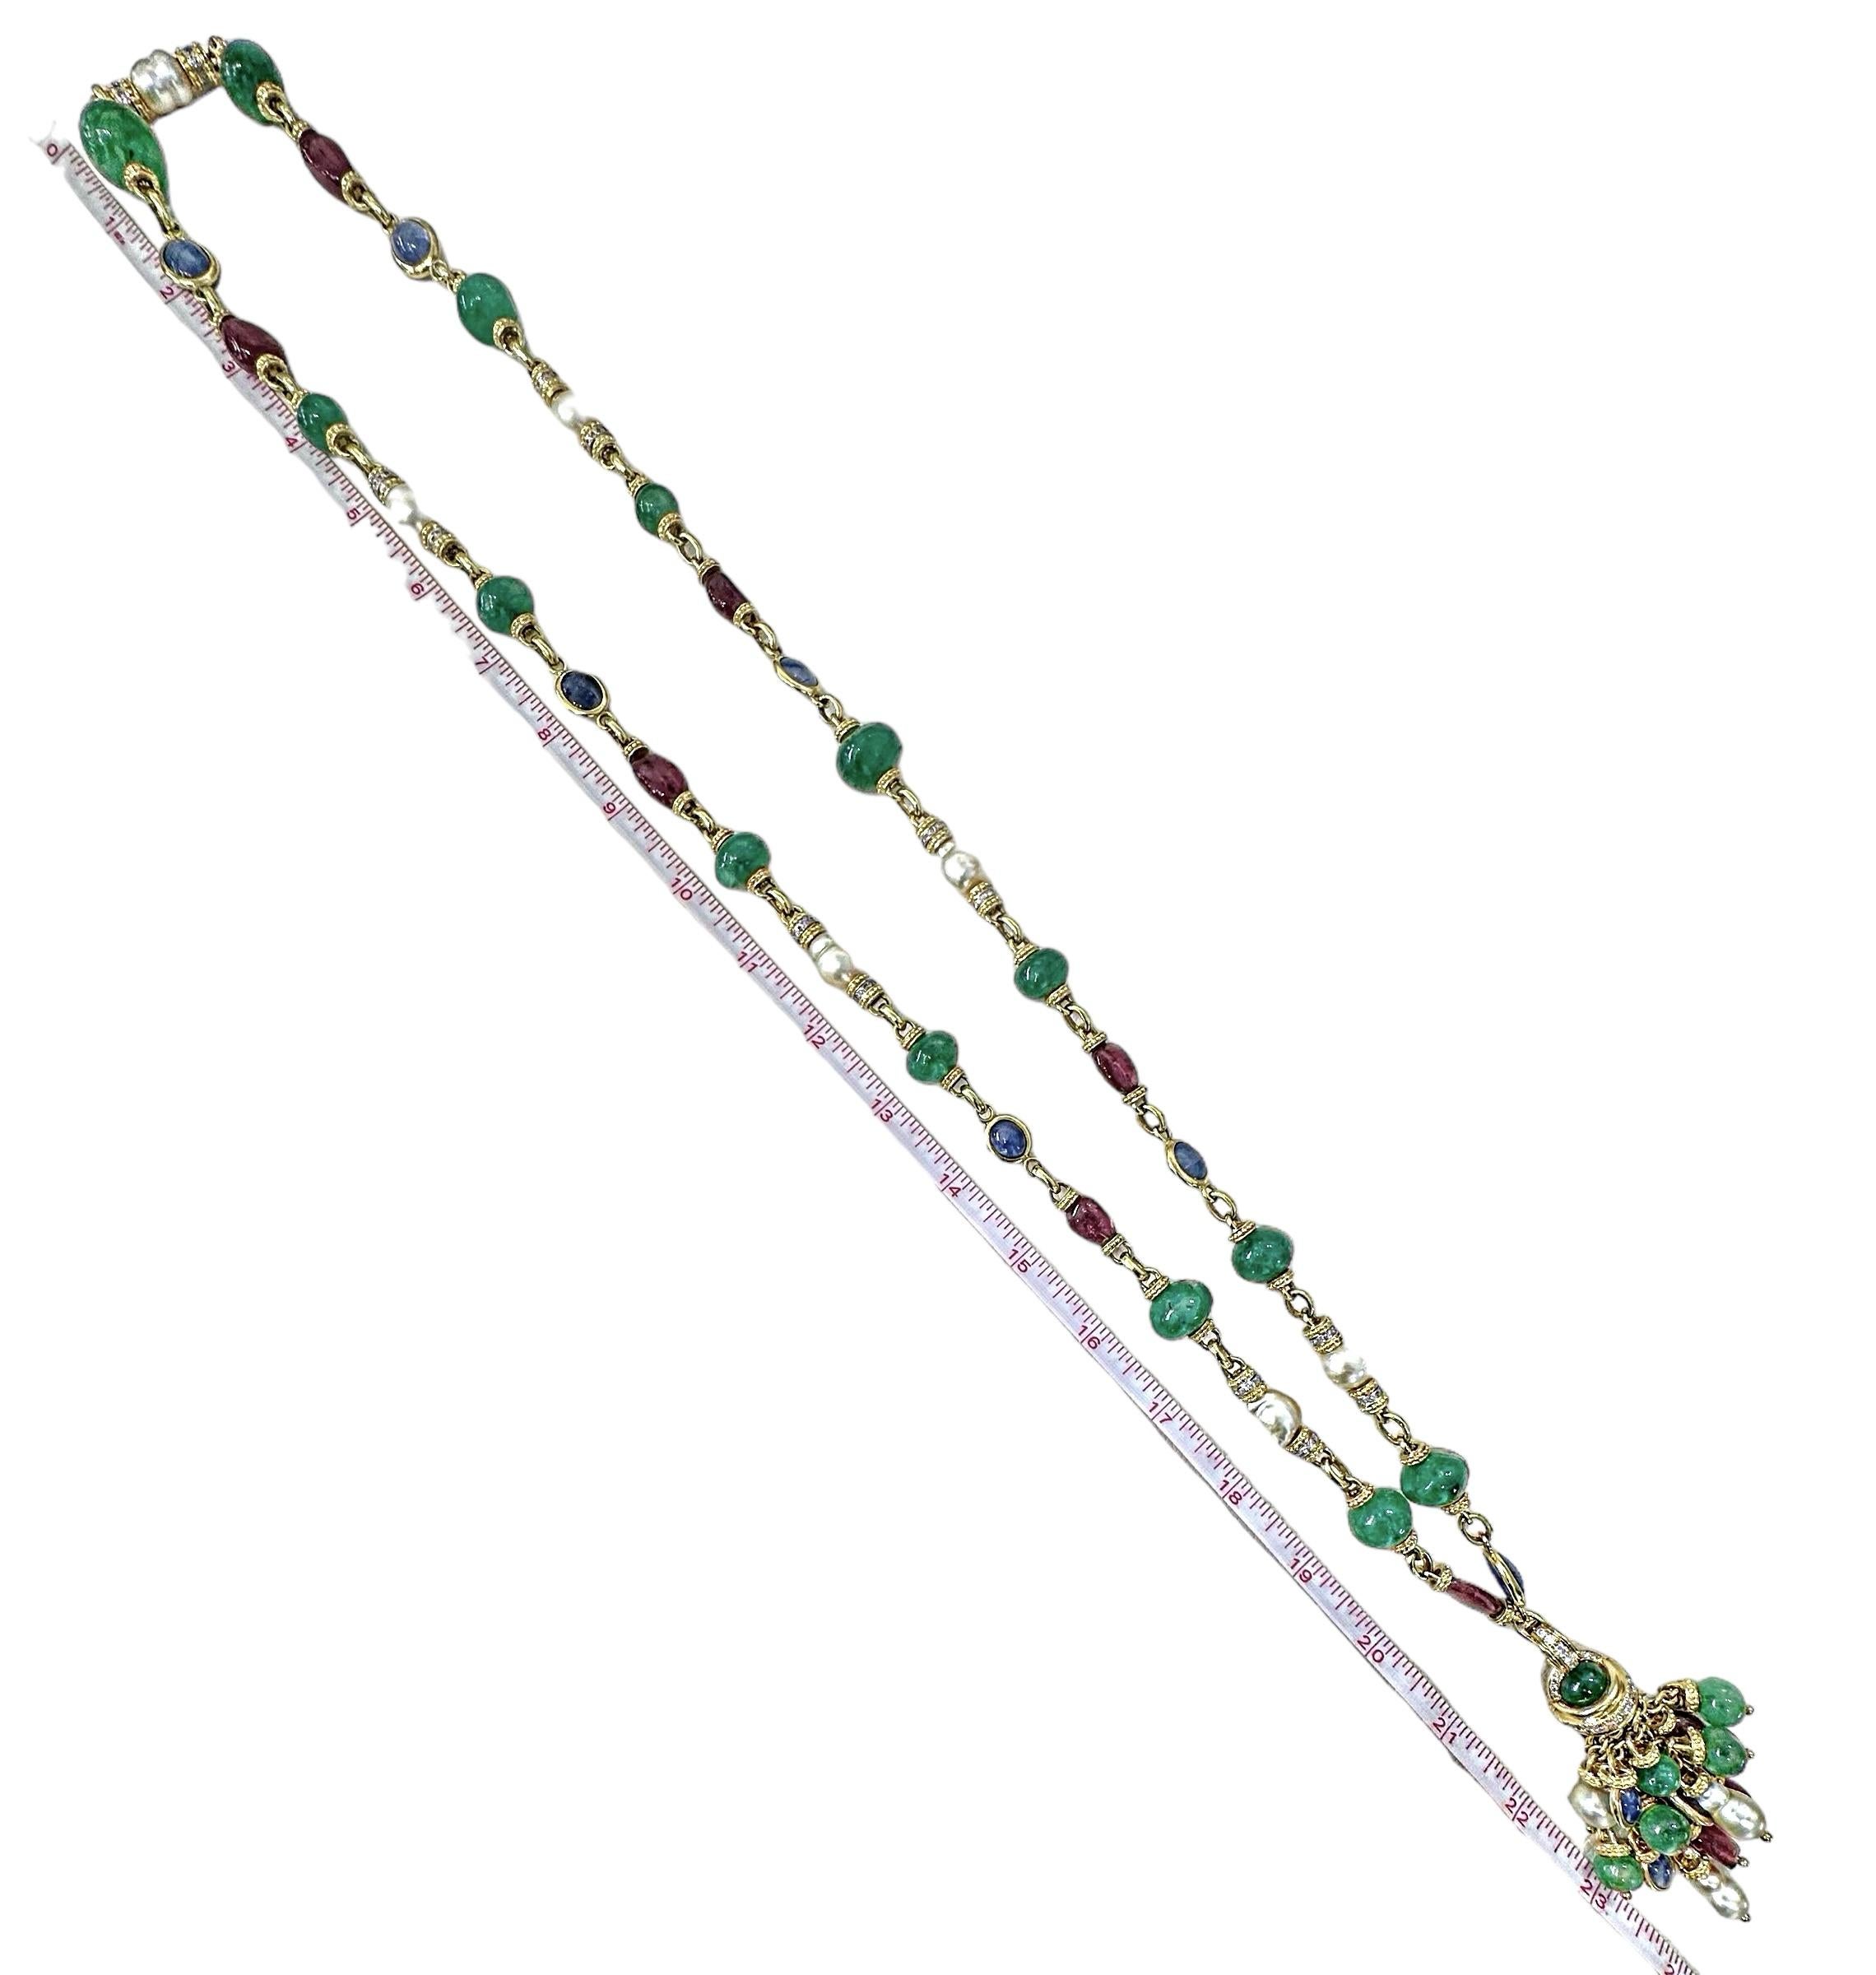 Vintage 40 Inch Long Gold, Diamond & Multicolor Stone Necklace by Tambetti For Sale 3